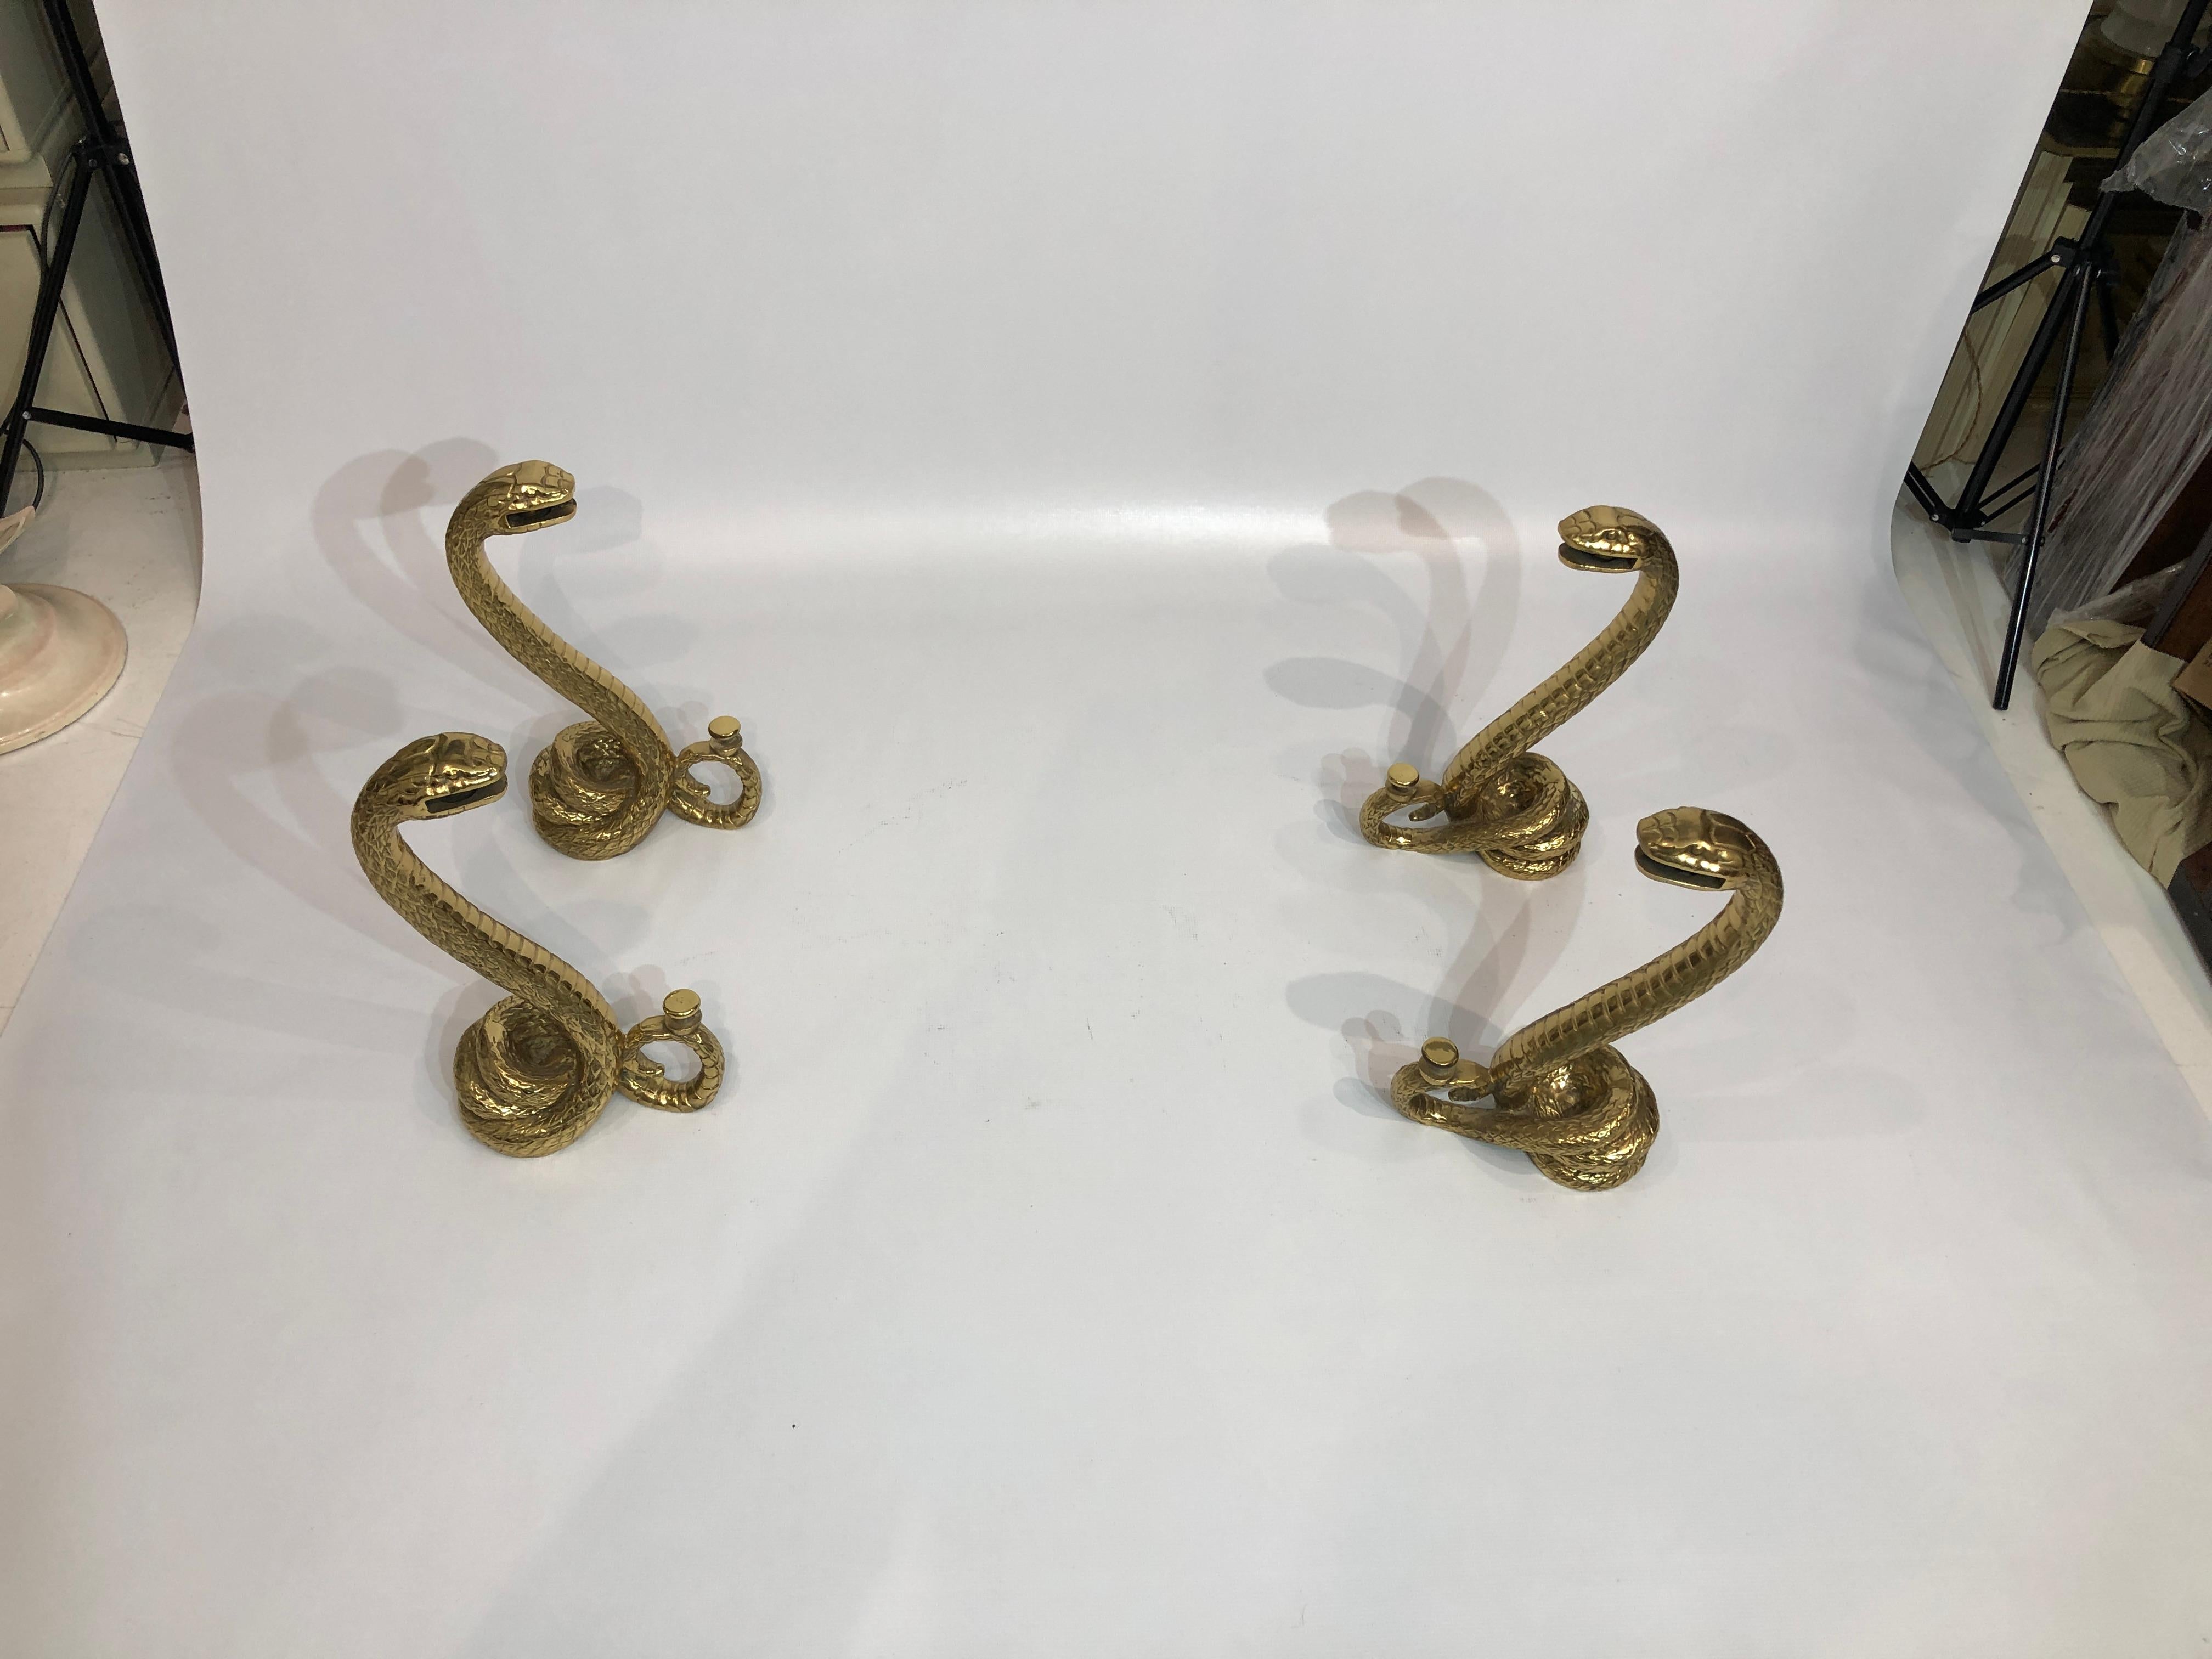 Alain Chervet Brass Snakes Coffee Table Base 1970s Glass Hollywood Regency In Good Condition For Sale In London, GB